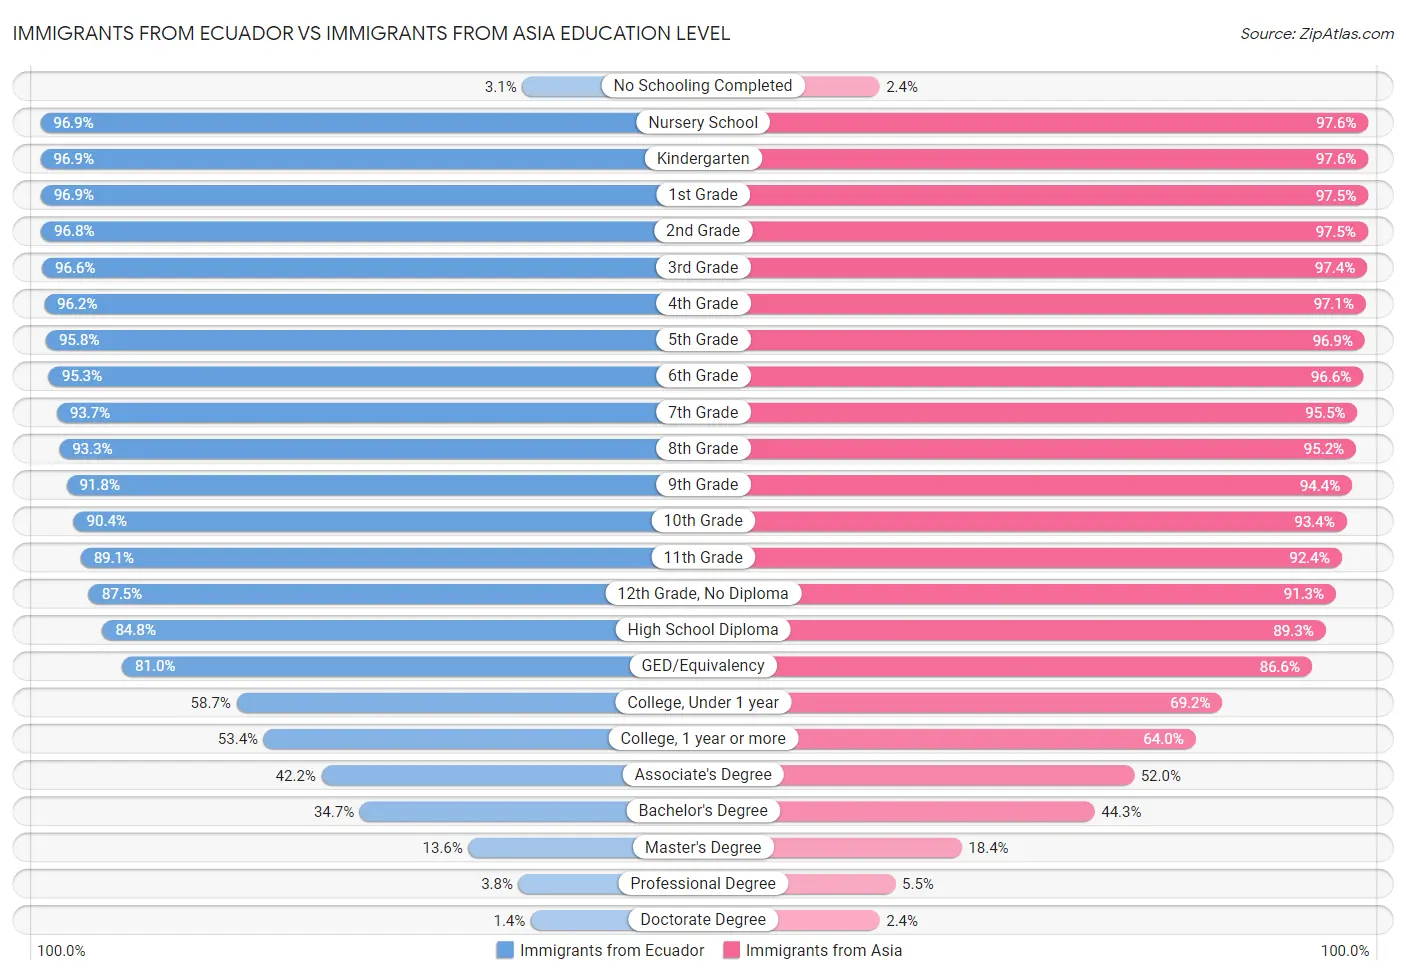 Immigrants from Ecuador vs Immigrants from Asia Education Level